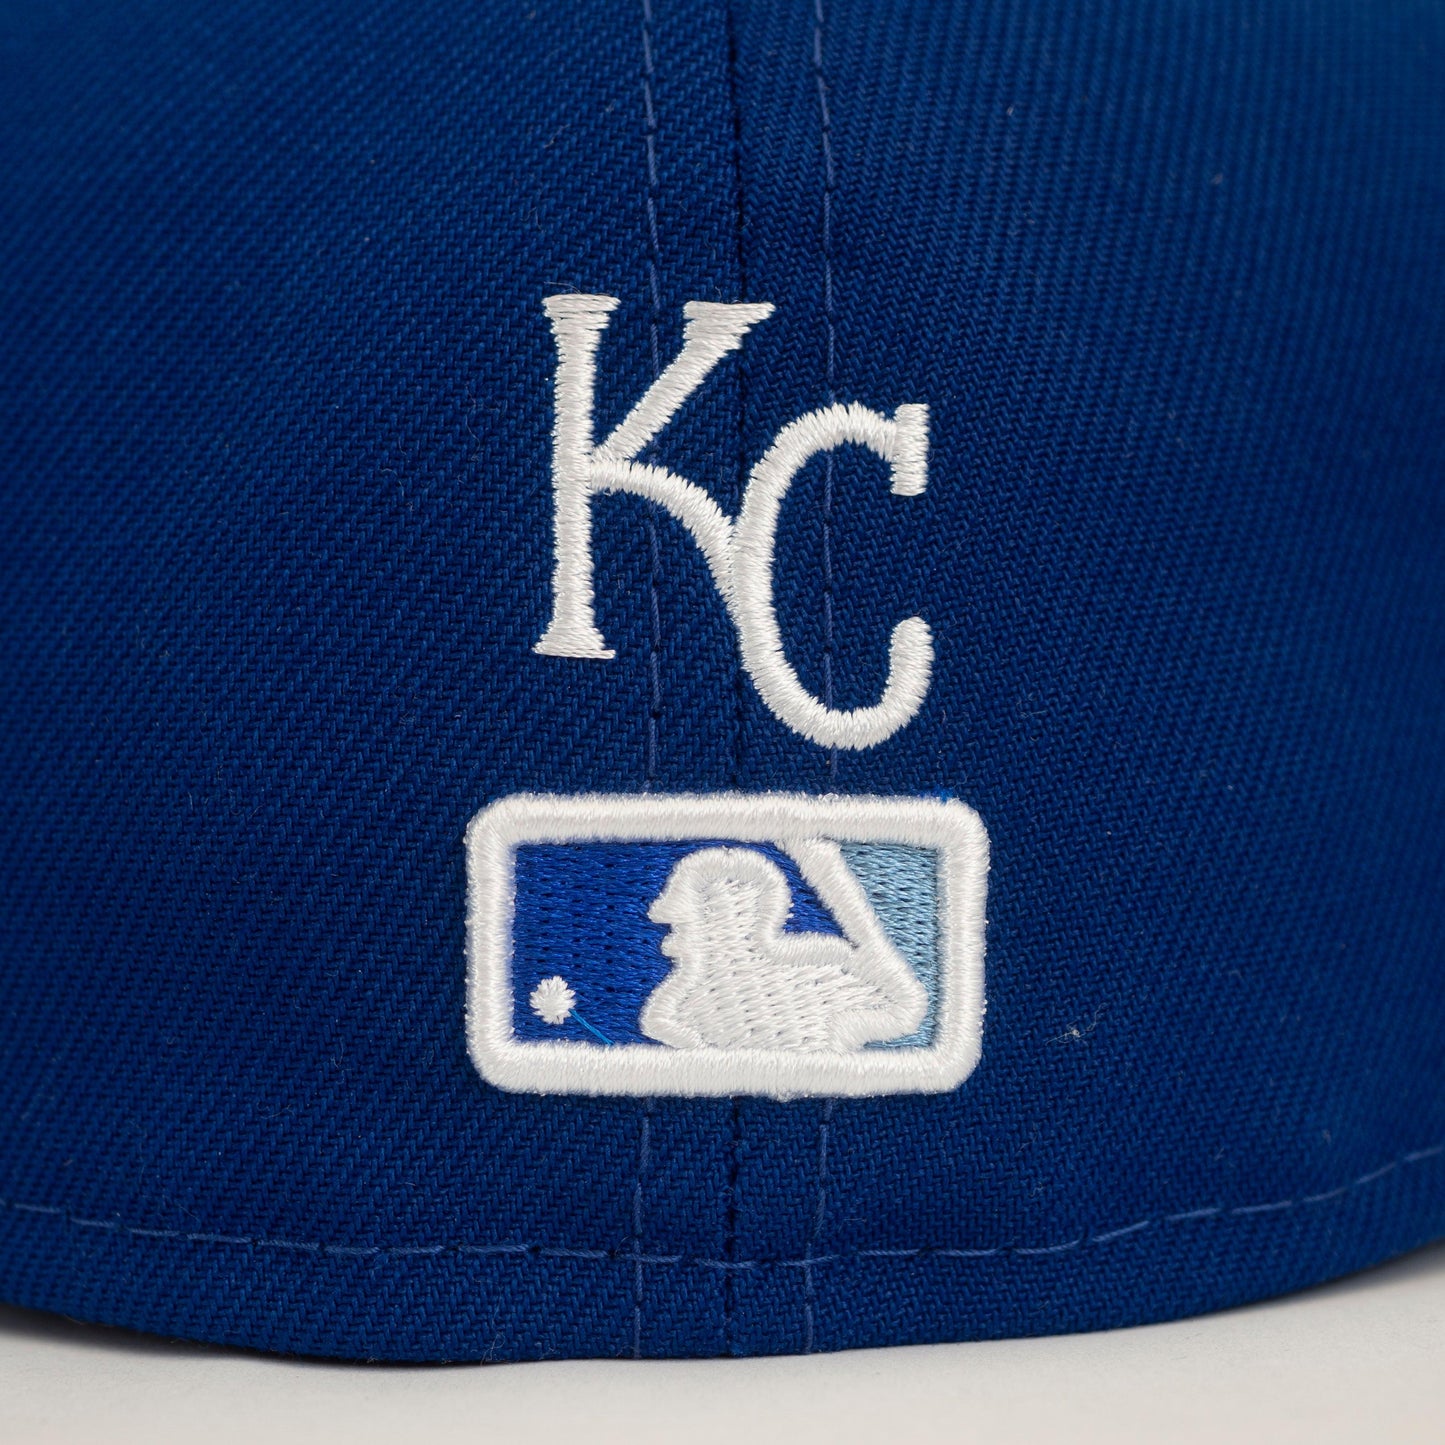 NEW ERA 59FIFTY MLB KANSAS CITY ROYALS SIDE PATCH BLOOM BLUE / SKY BLUE UV FITTED CAP